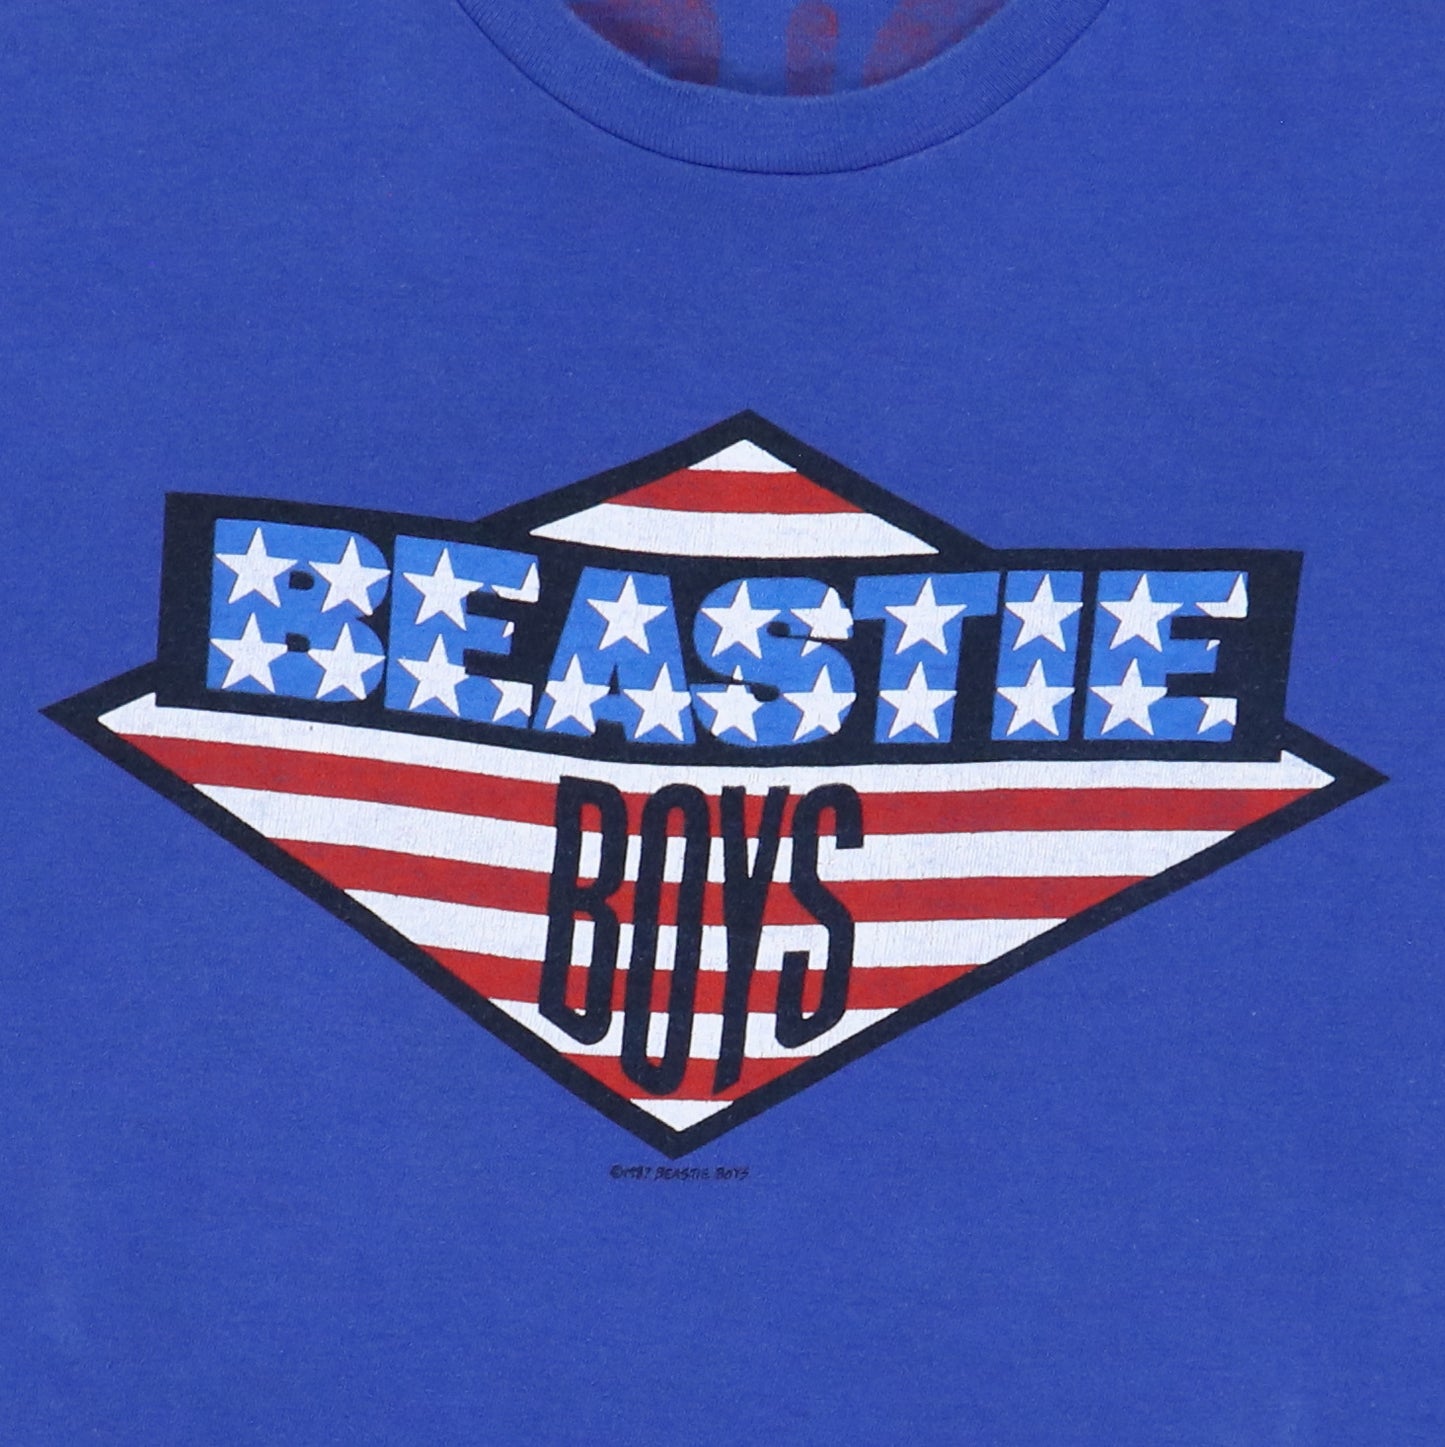 1987 Beastie Boys Fight For Your Right To Party Shirt